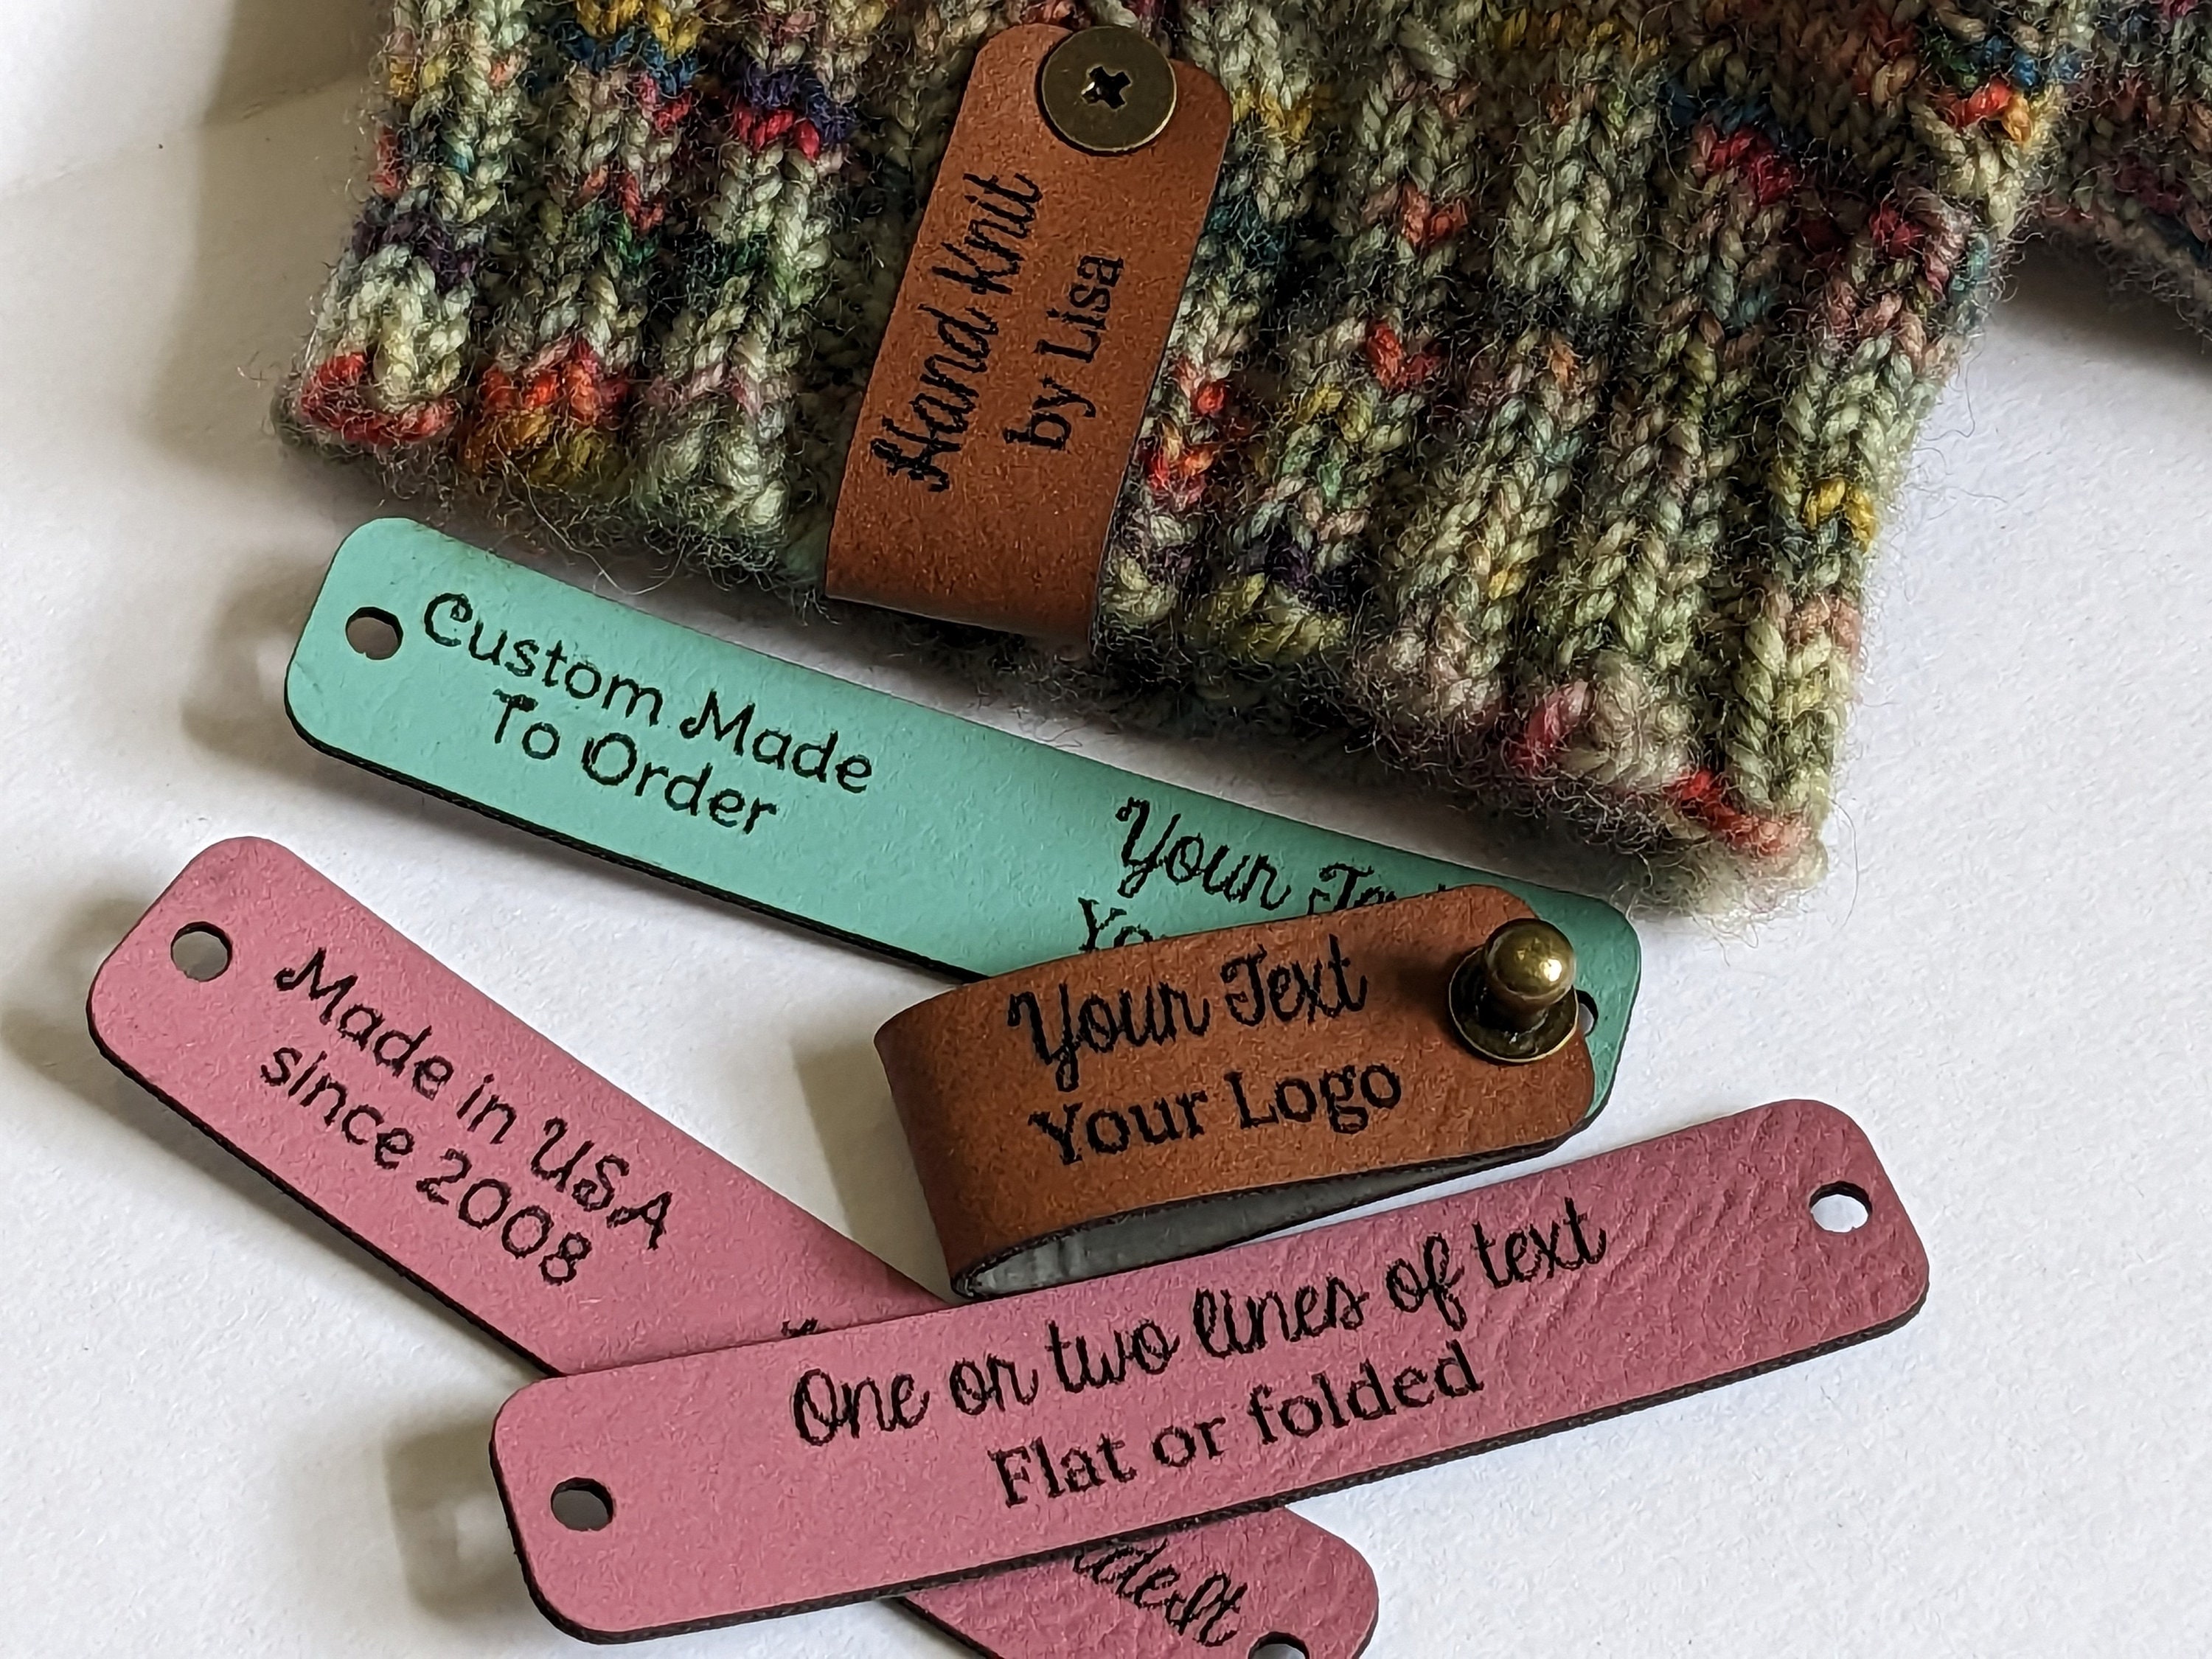  Sewing Leather Tag,Personalized with Custom Logo or Text for  Hats Knits Tag,Crochet and Handmade Brands Clothes Labels (Primary  Color,Square) : Arts, Crafts & Sewing